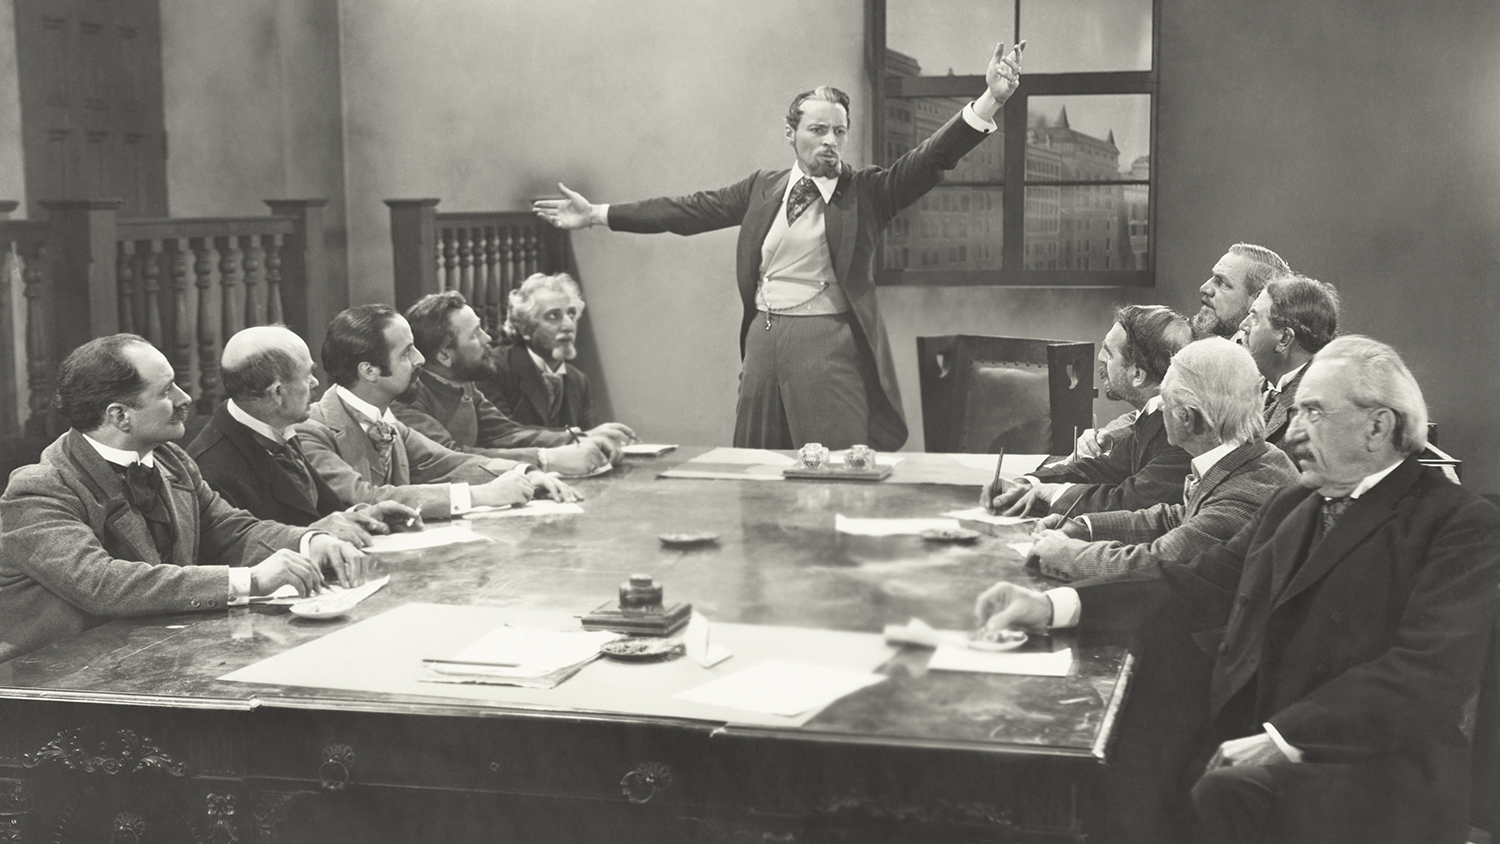 Man in a waistcoat talking to a committee of similarly dressed old white men